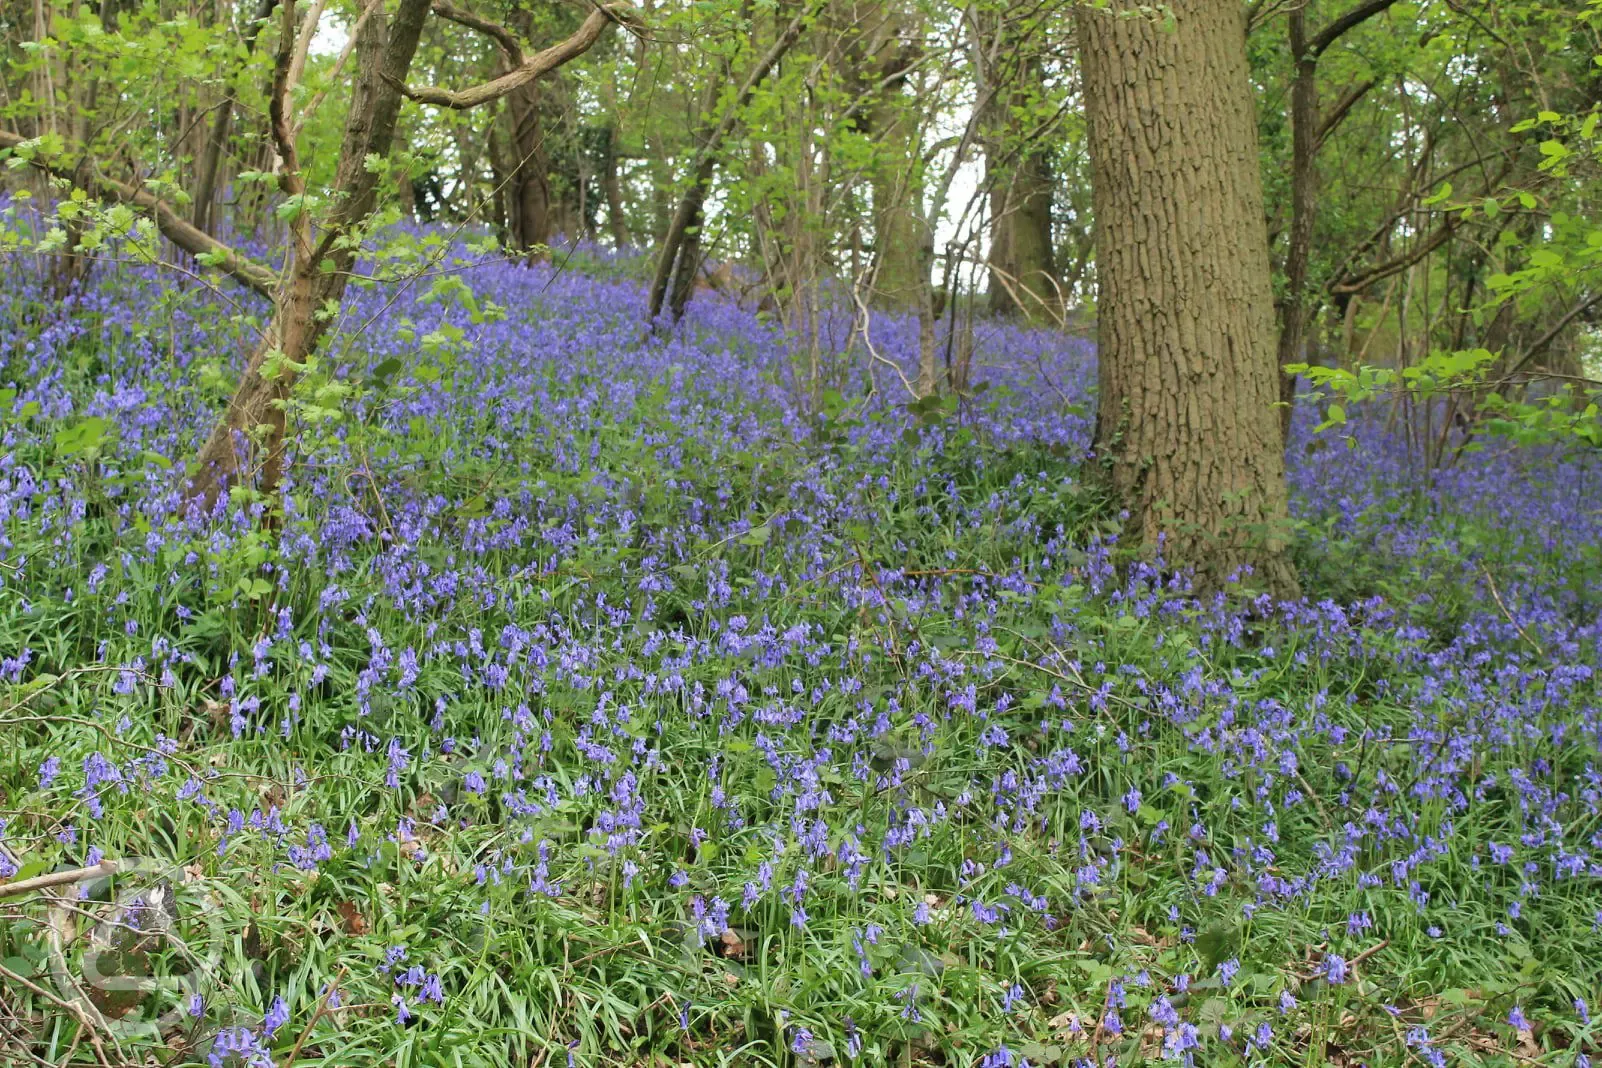 Bluebells in the woodlands